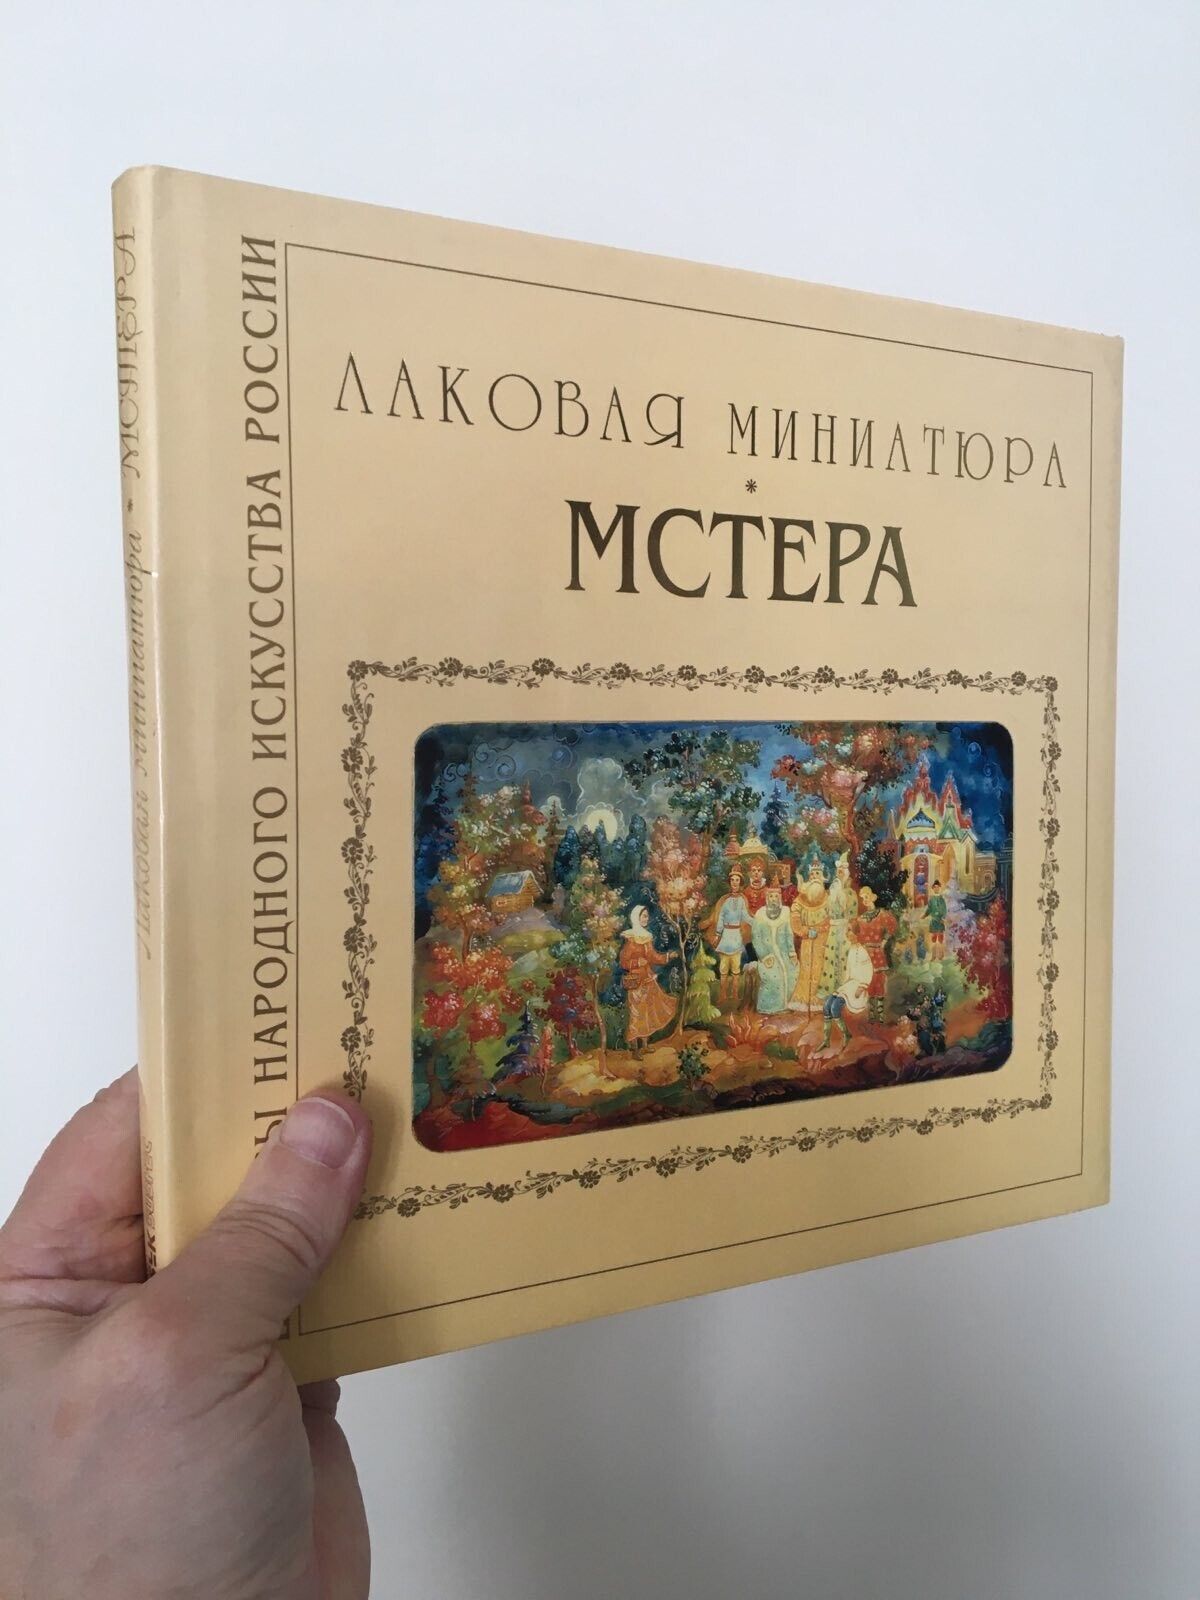 ❗🔥Book Russian LACQUER MINIATURES MSTERA by Solovyeva Larissa for a collection